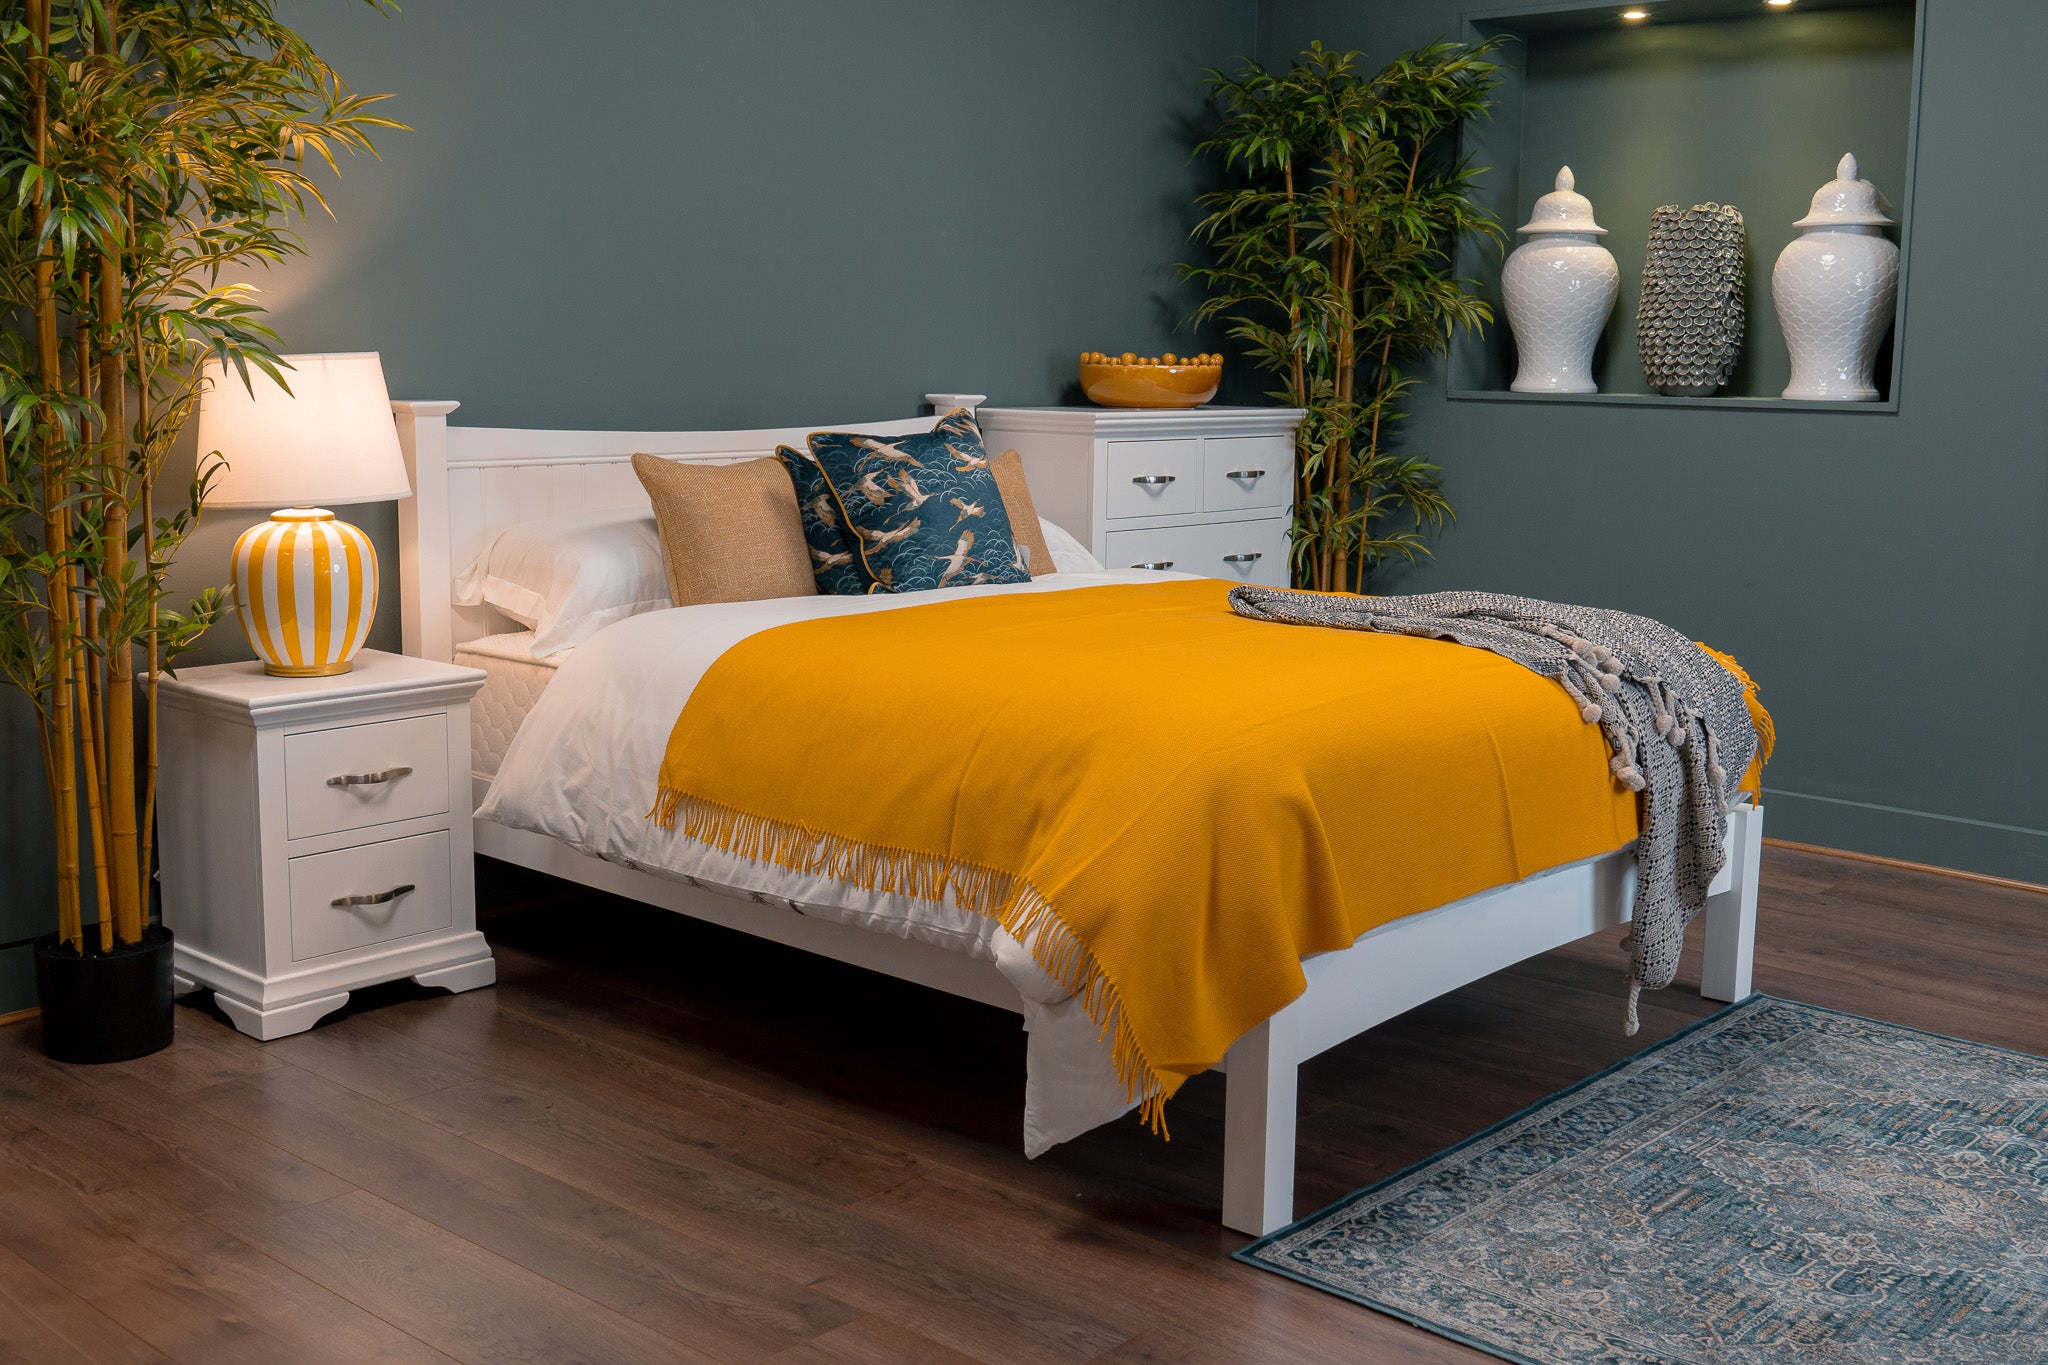 Layla 5ft King Size Off-White Wood Bed Frame